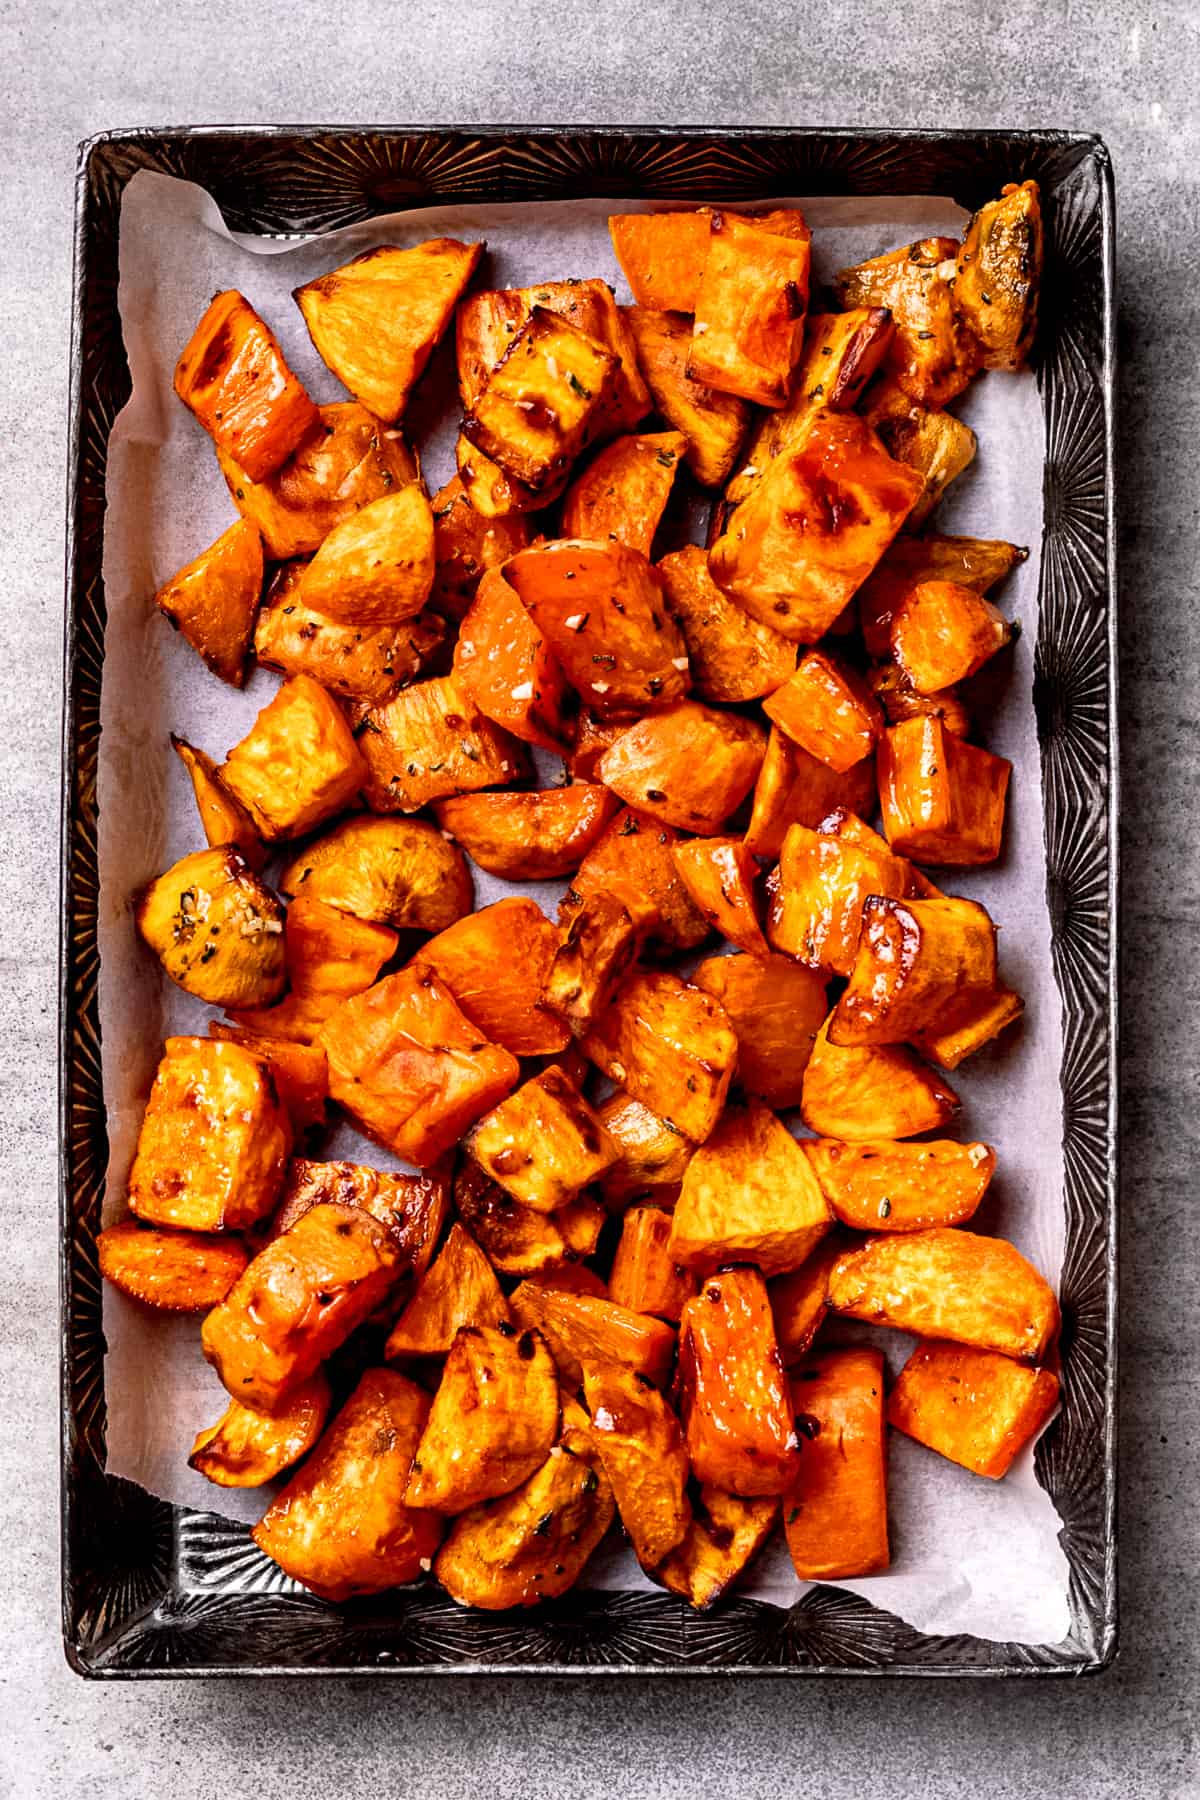 A tray of roasted sweet potatoes.